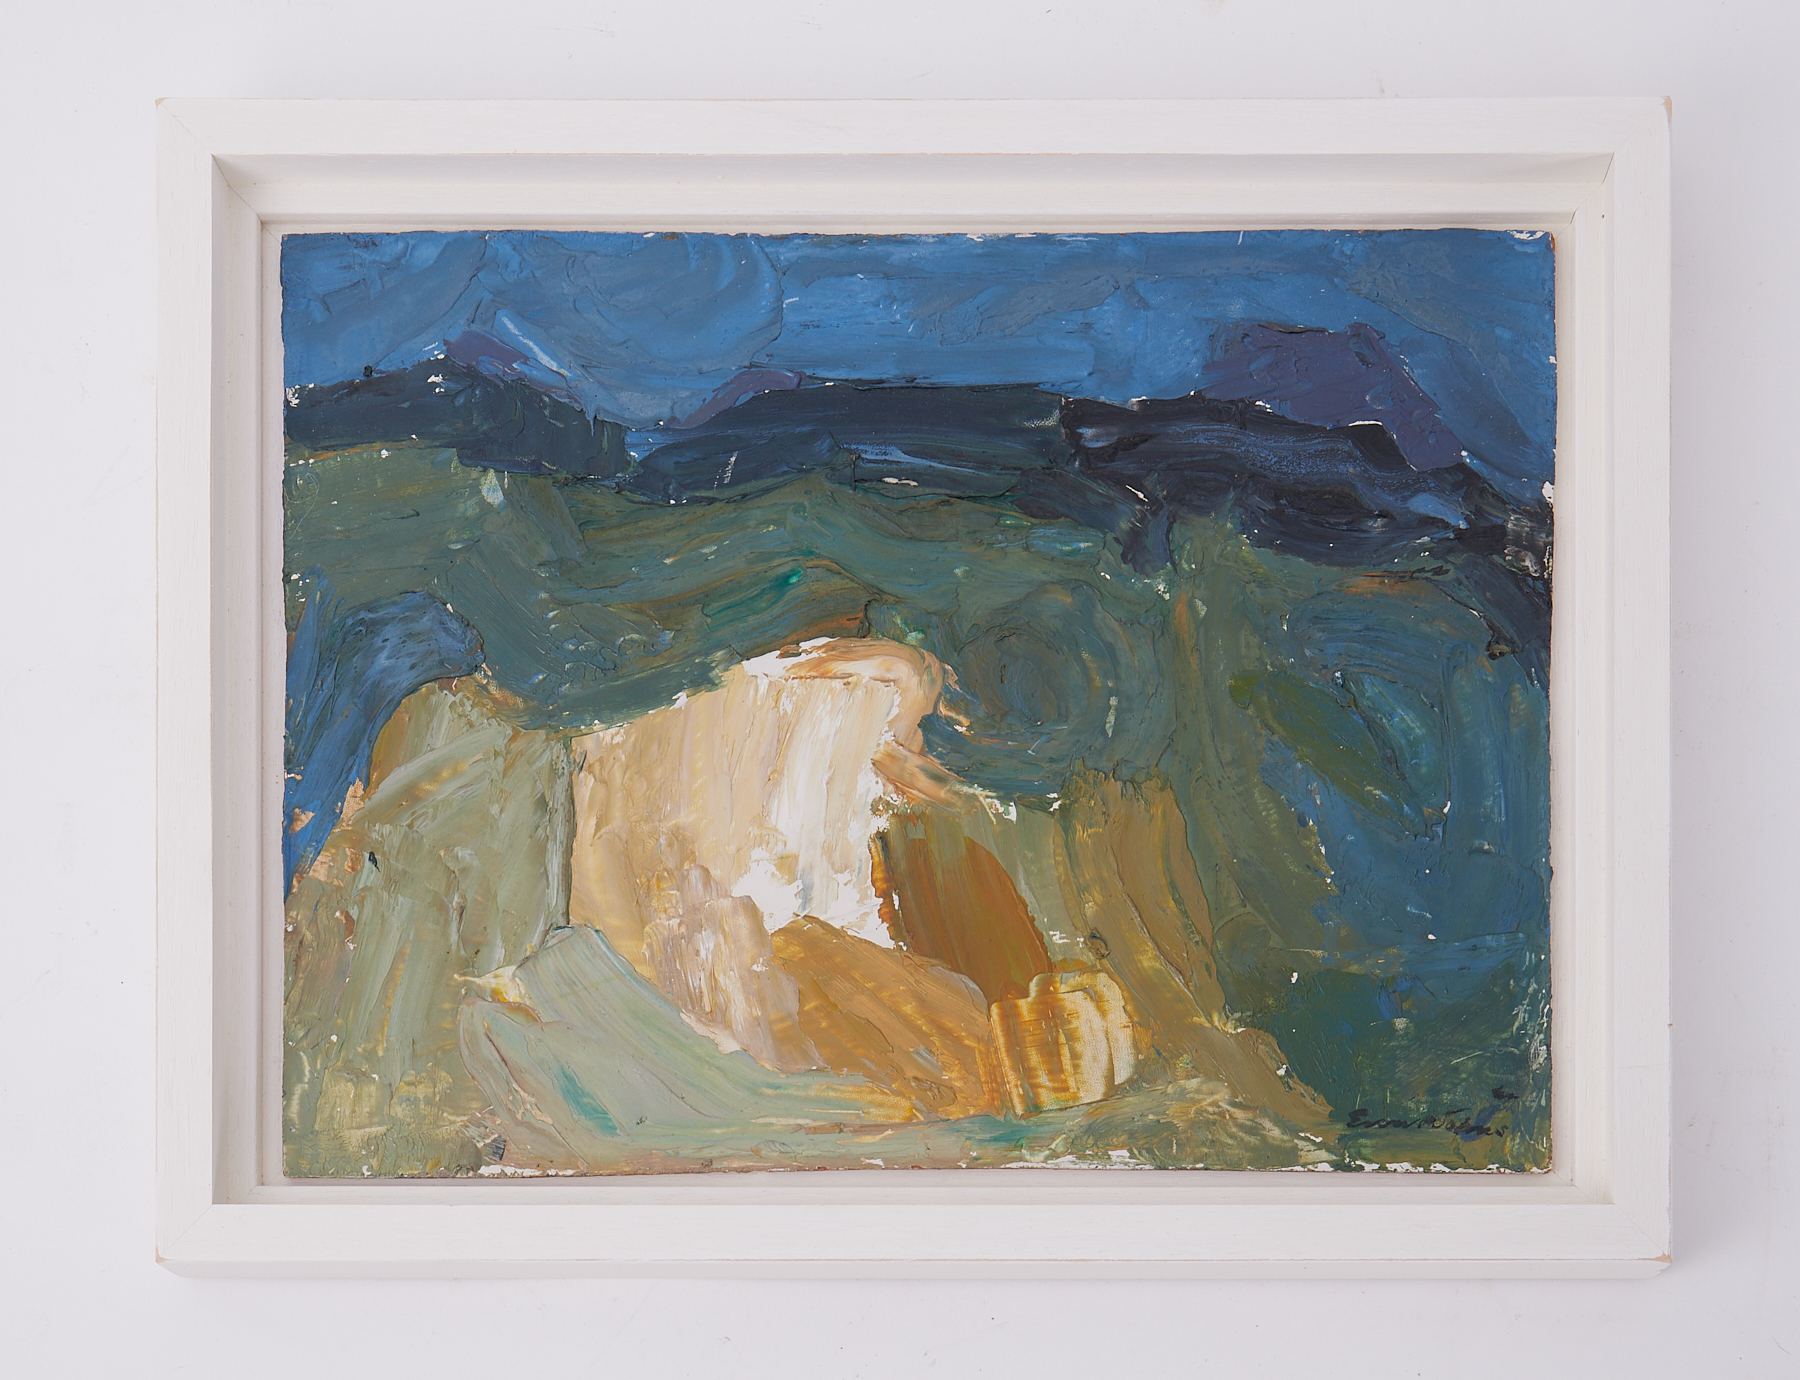 Framed painting titled ' Fields and Hills, Donegal' 1962, oil on board, 29cm x 40cm